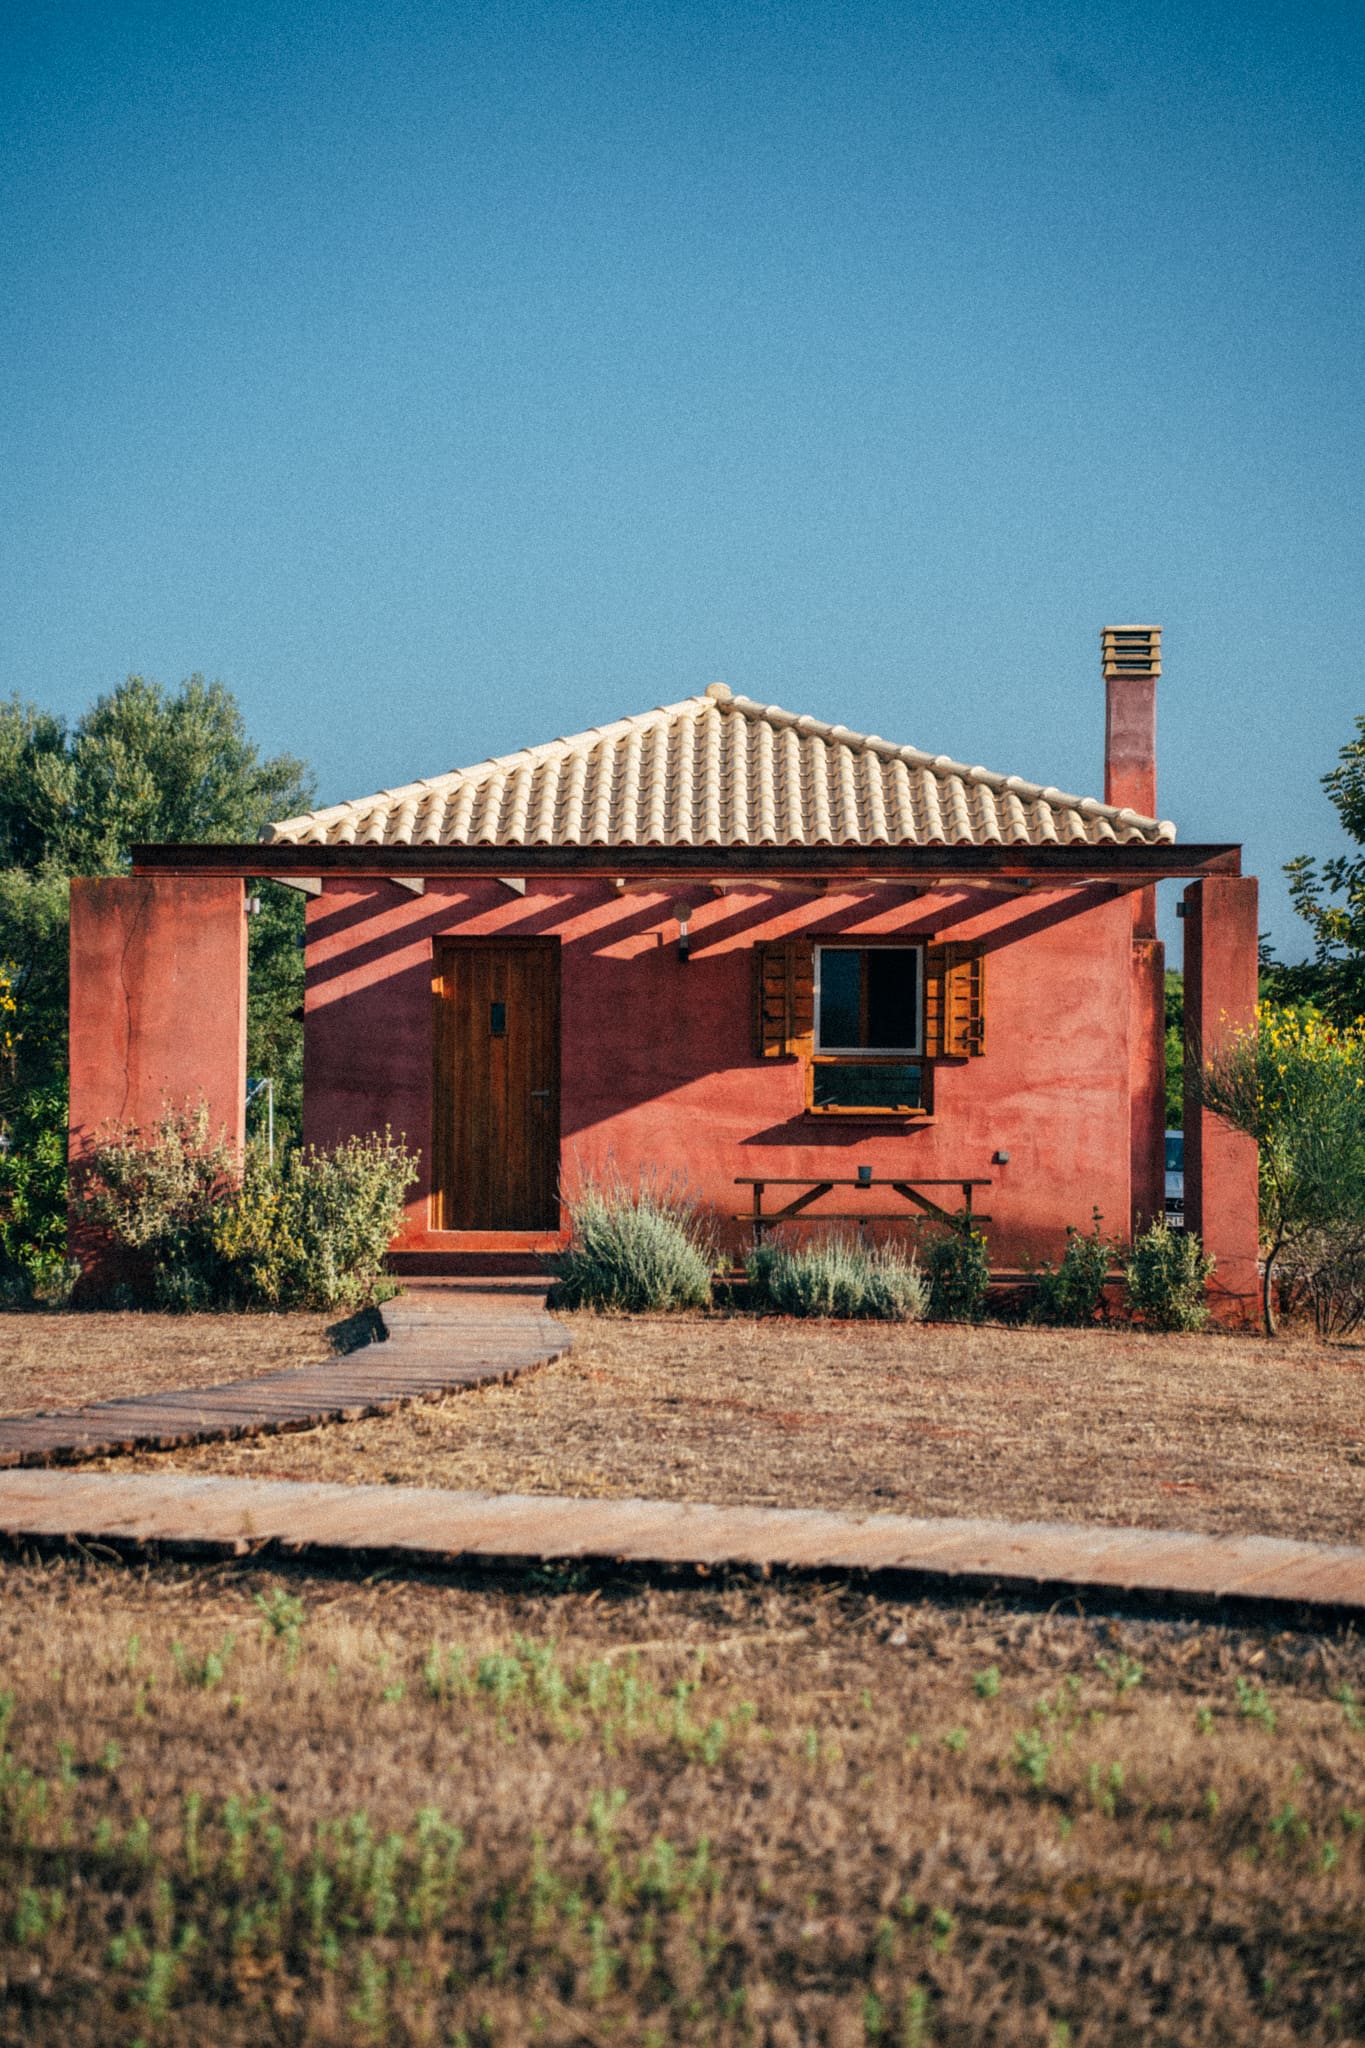 The best farm stays in Europe | The rustic pink exterior of Eumelia Organic Agrotourism Farm, Greece